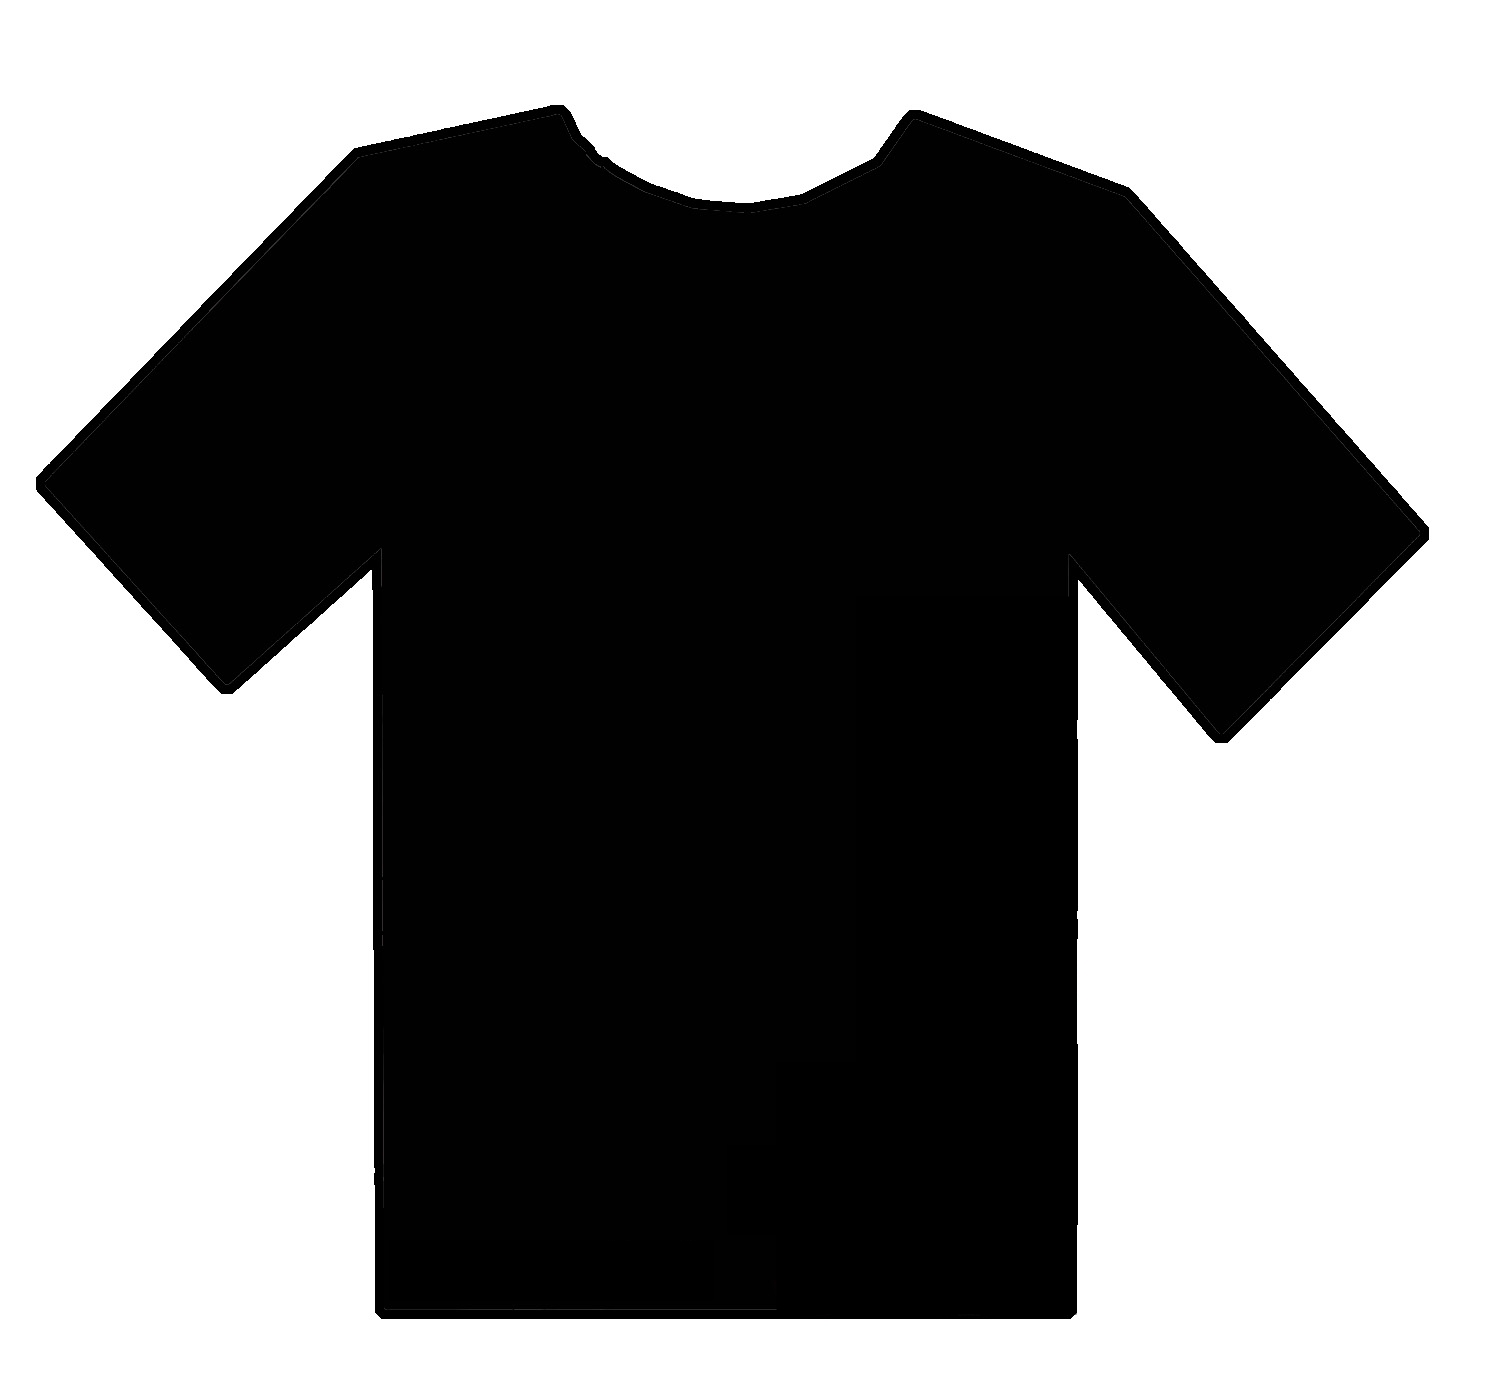 Blank T Shirts Vector Illustration Front And Back By Mr on ...